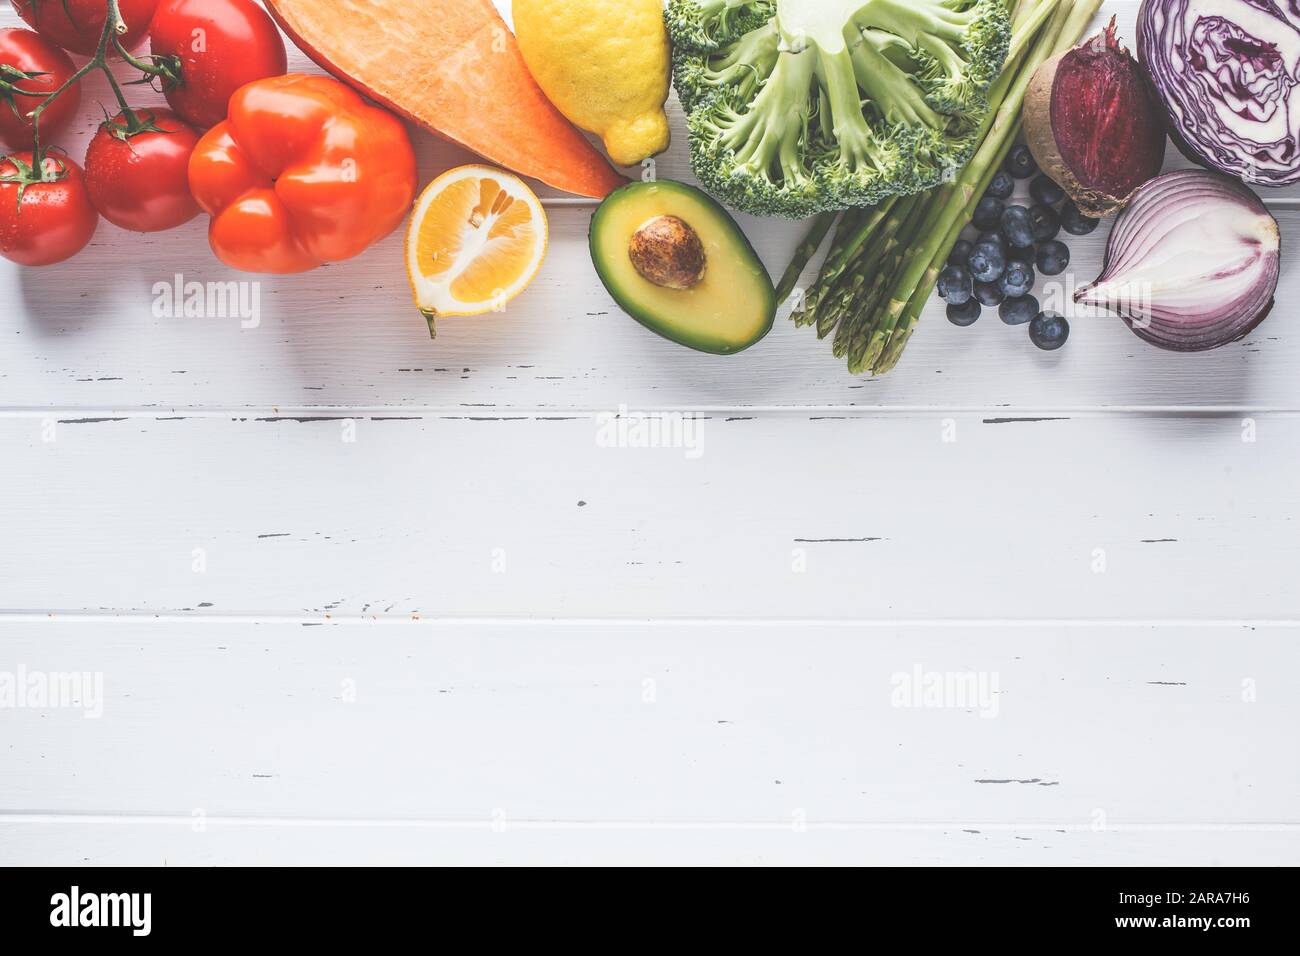 Rainbow colors vegetables and berry background. Detox, vegan food, ingredients for juice and salad. Stock Photo